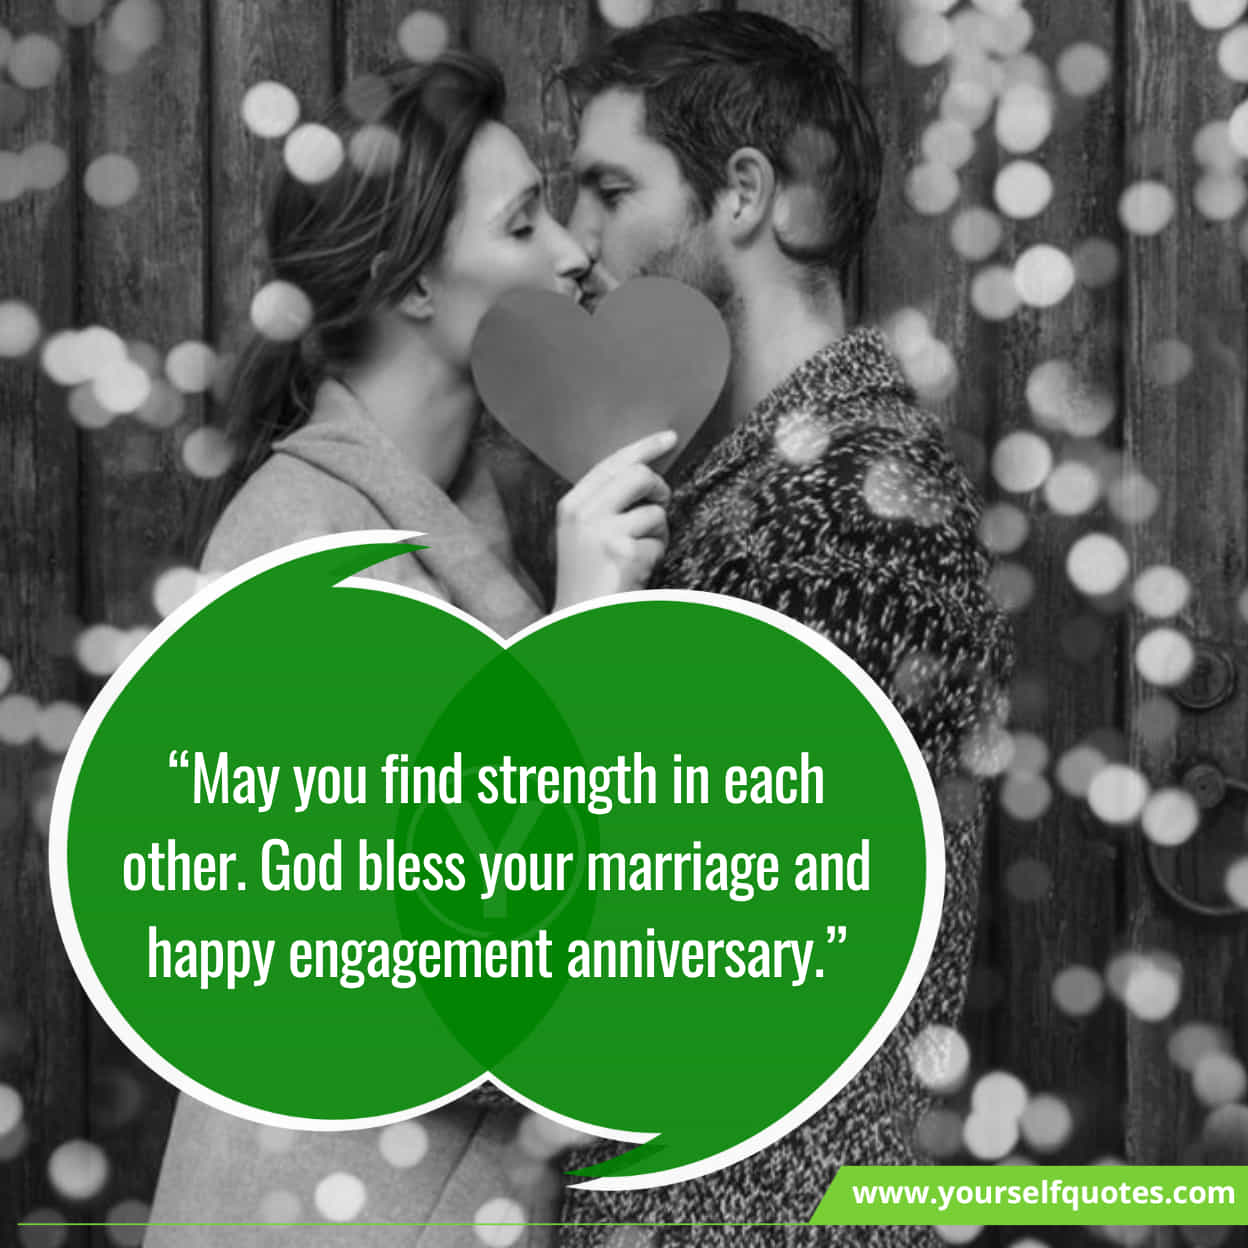 Alluring Wishes On Loved Ones Happy Engagement Anniversary